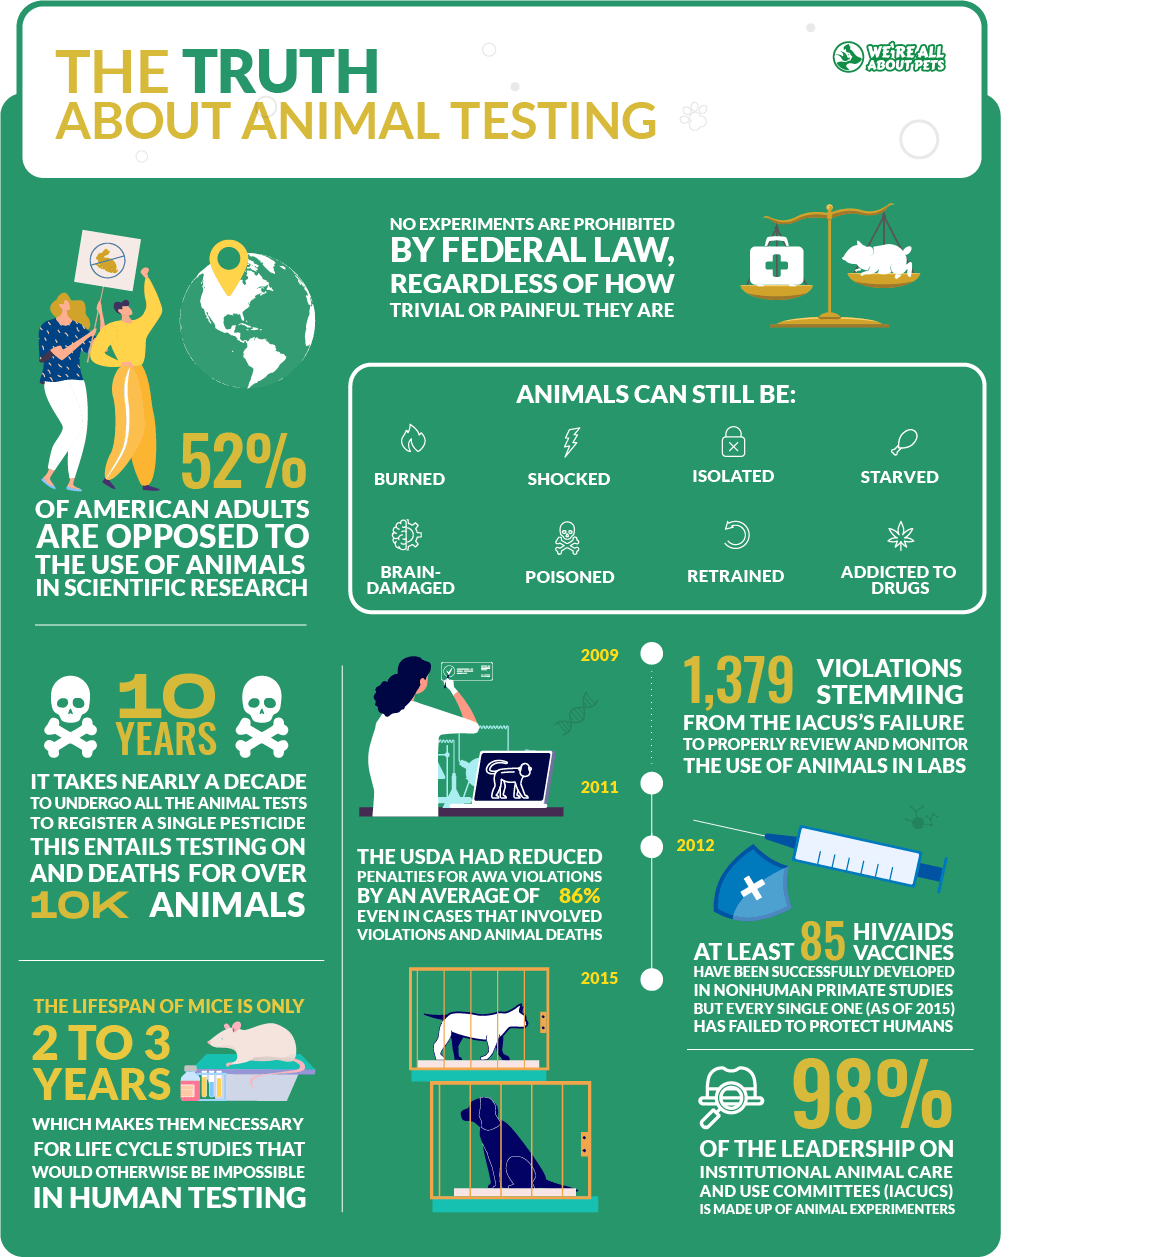 55 Powerful Animal Testing Statistics - We're All About Pets